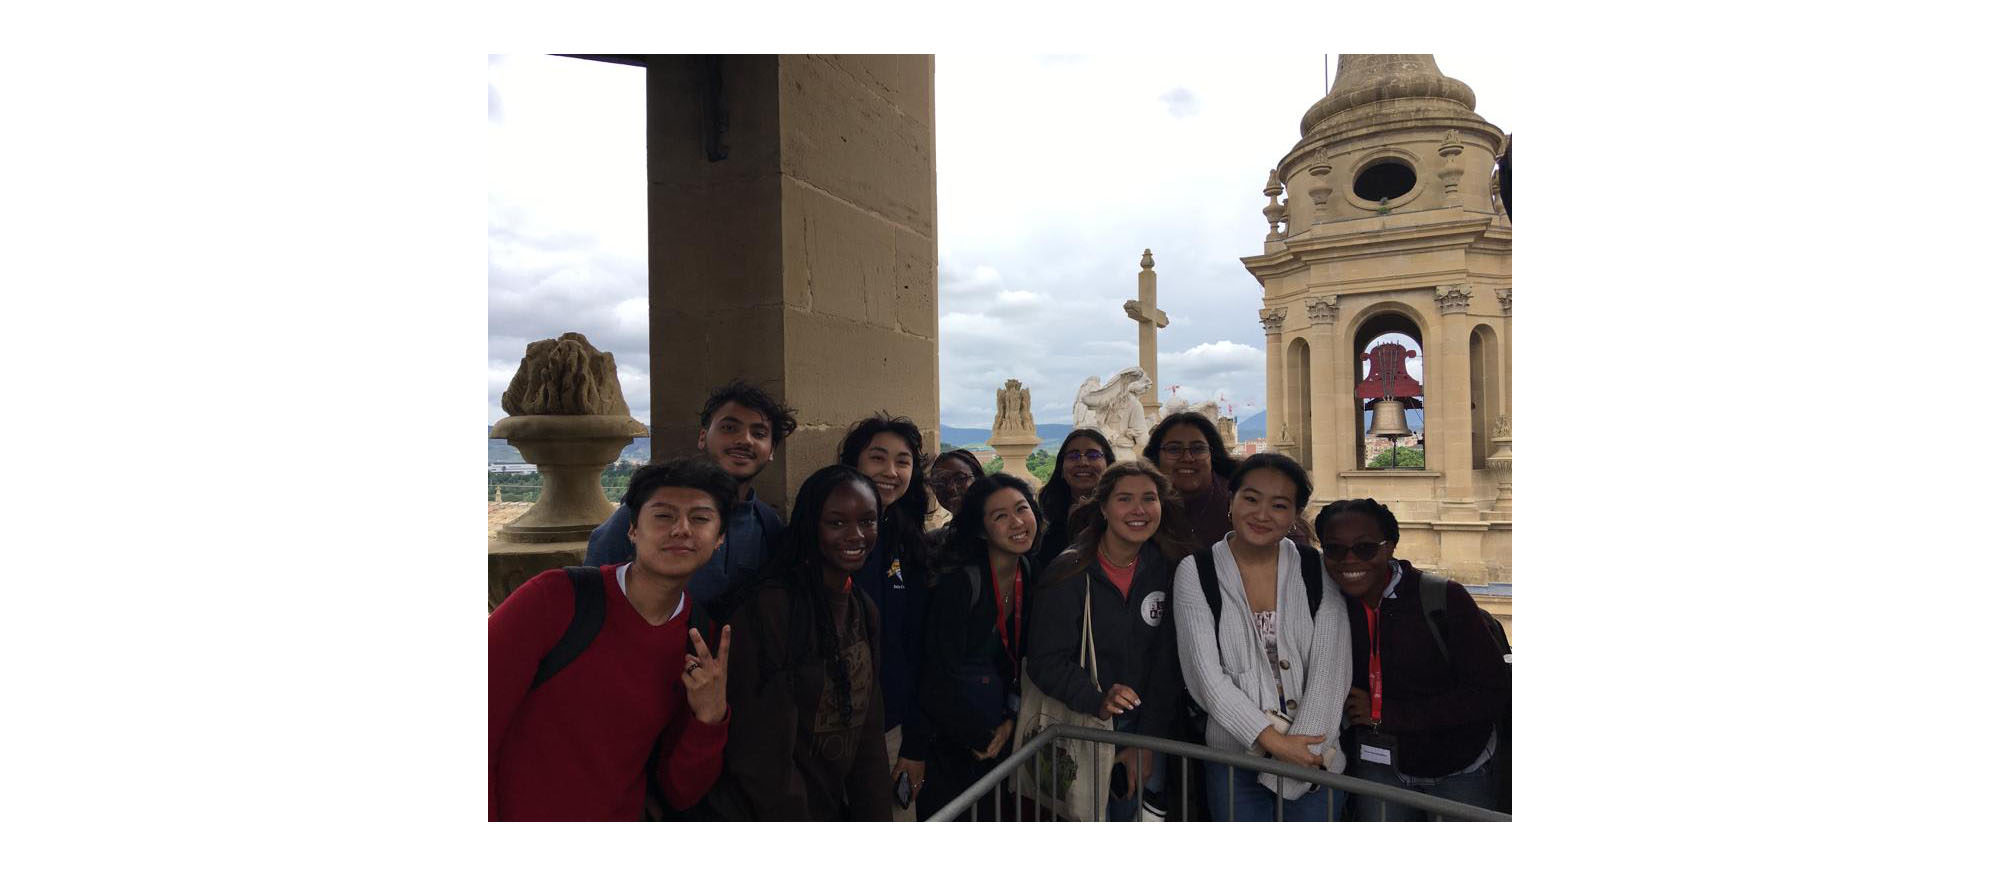 Linda and a group of her fellow Rice students pose for a picture inside of a cathedral in Pamplona.